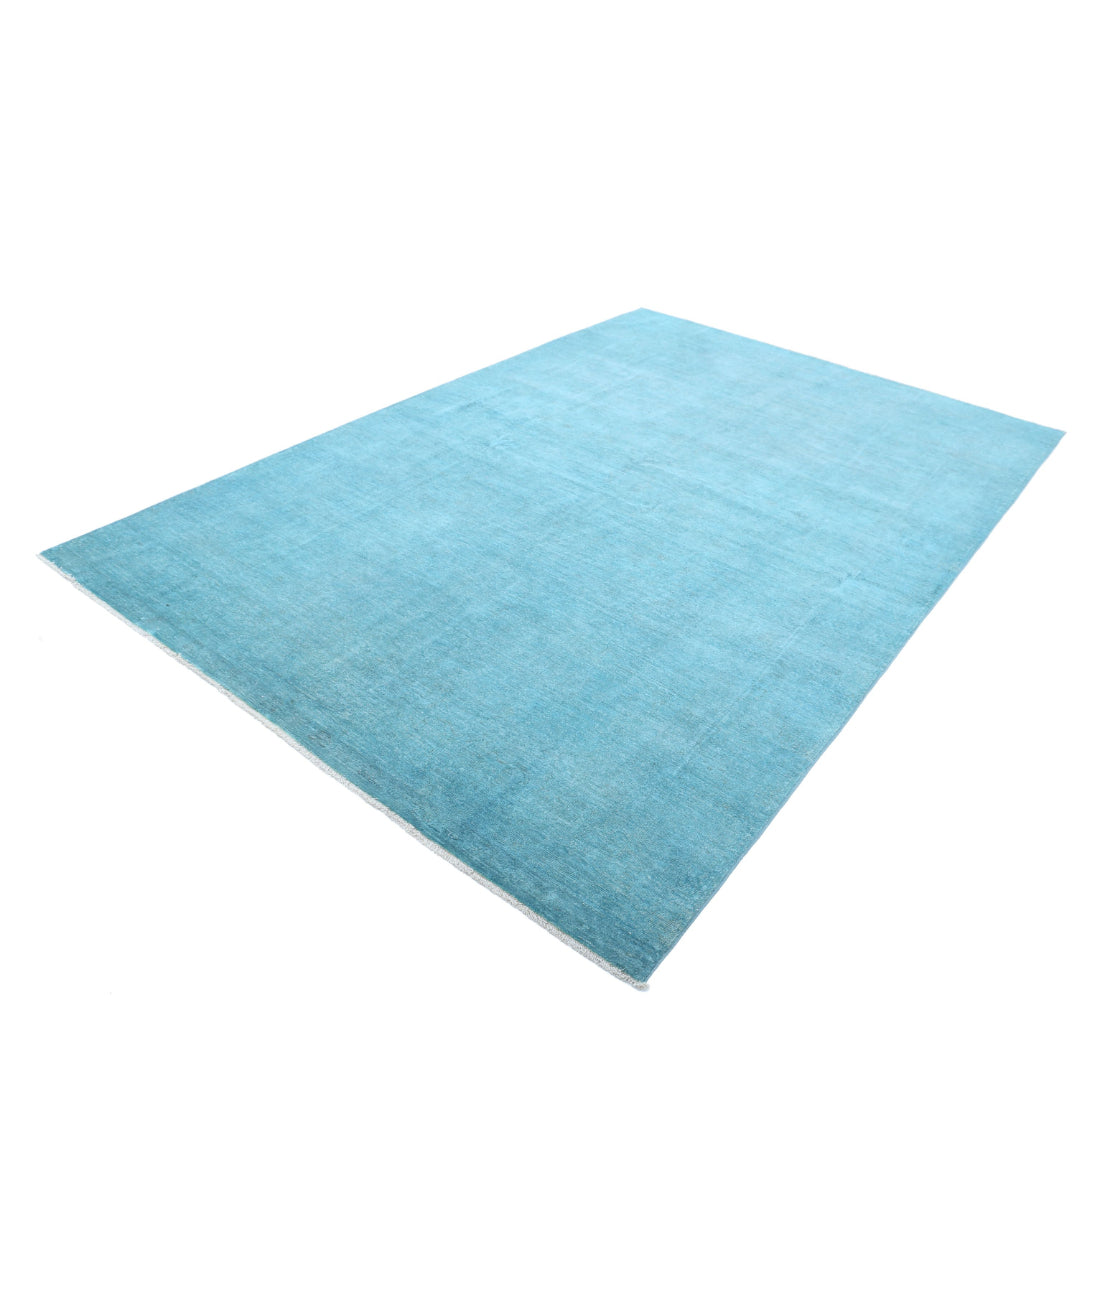 Hand Knotted Overdye Wool Rug - 6'9'' x 9'9'' 6'9'' x 9'9'' (203 X 293) / Teal / Teal